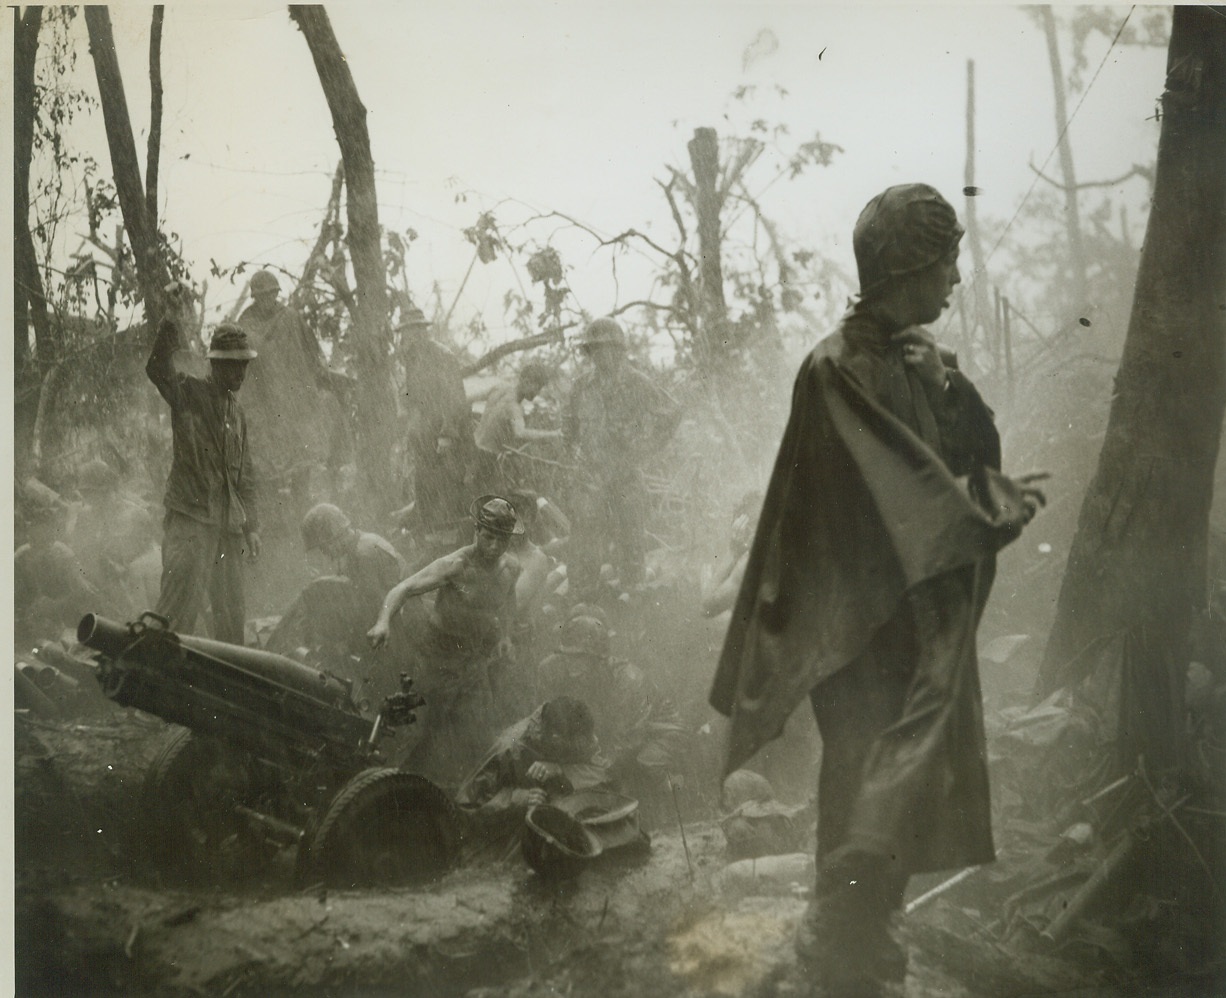 Fighting Through the Downpour, 1/18/1944. Cape Gloucester, New Britain – In spite of the tropical downpour that literally falls in sheets, drenching the fighters and their equipment, our Marines carry on in their battle for Cape Gloucester. His uniform plastered to his body, a Leatherneck gun crew member raises his hand to give the firing signal to men manning this 75mm Howitzer. Credit: -WP-(ACME Photo by Frank Prist, Jr., for the War Picture Pool);